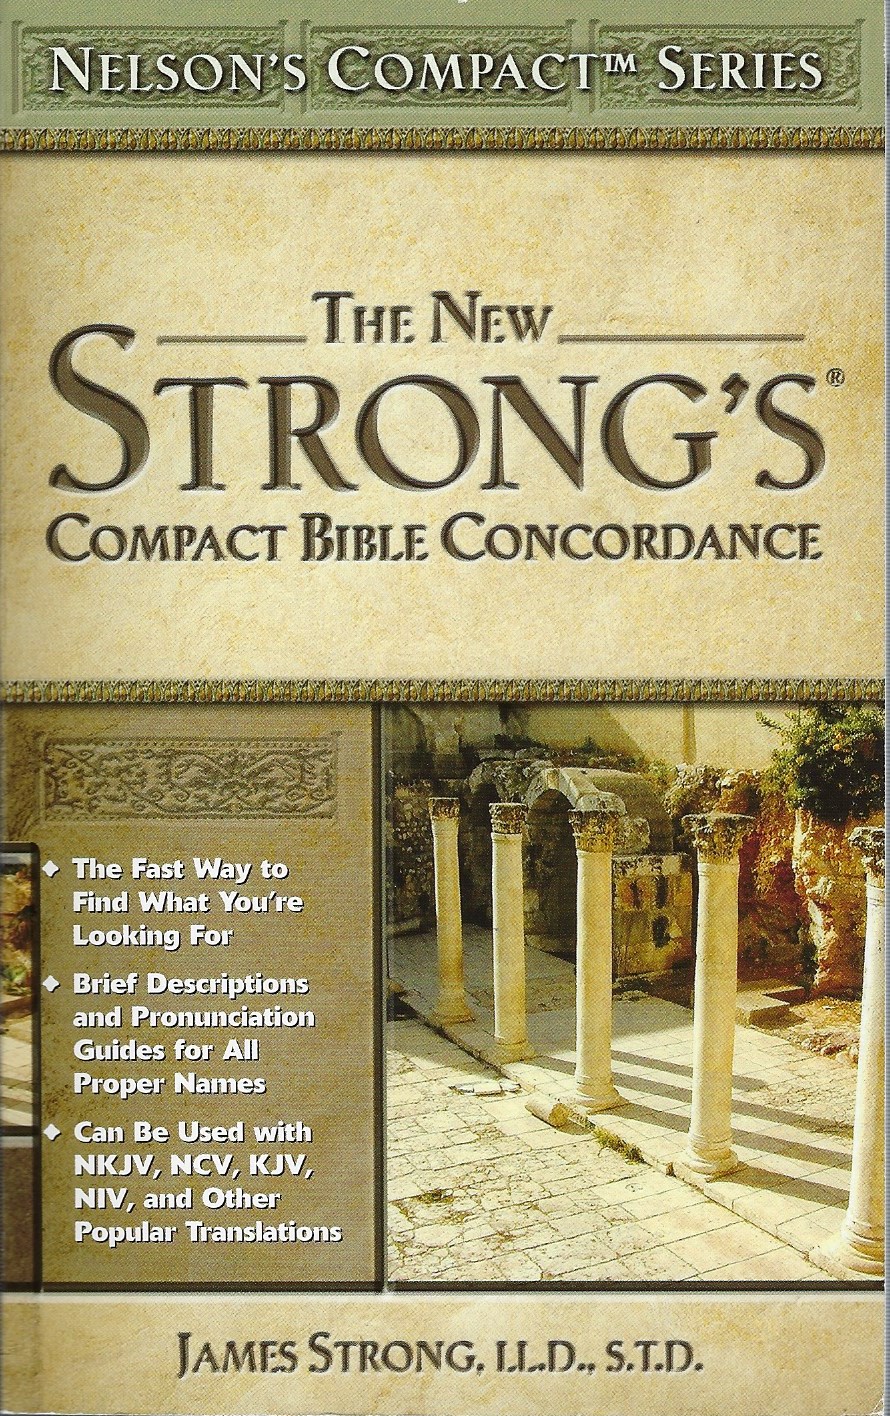 STRONG'S COMPACT CONCORDANCE James Strong, LL.D., S.T.D.